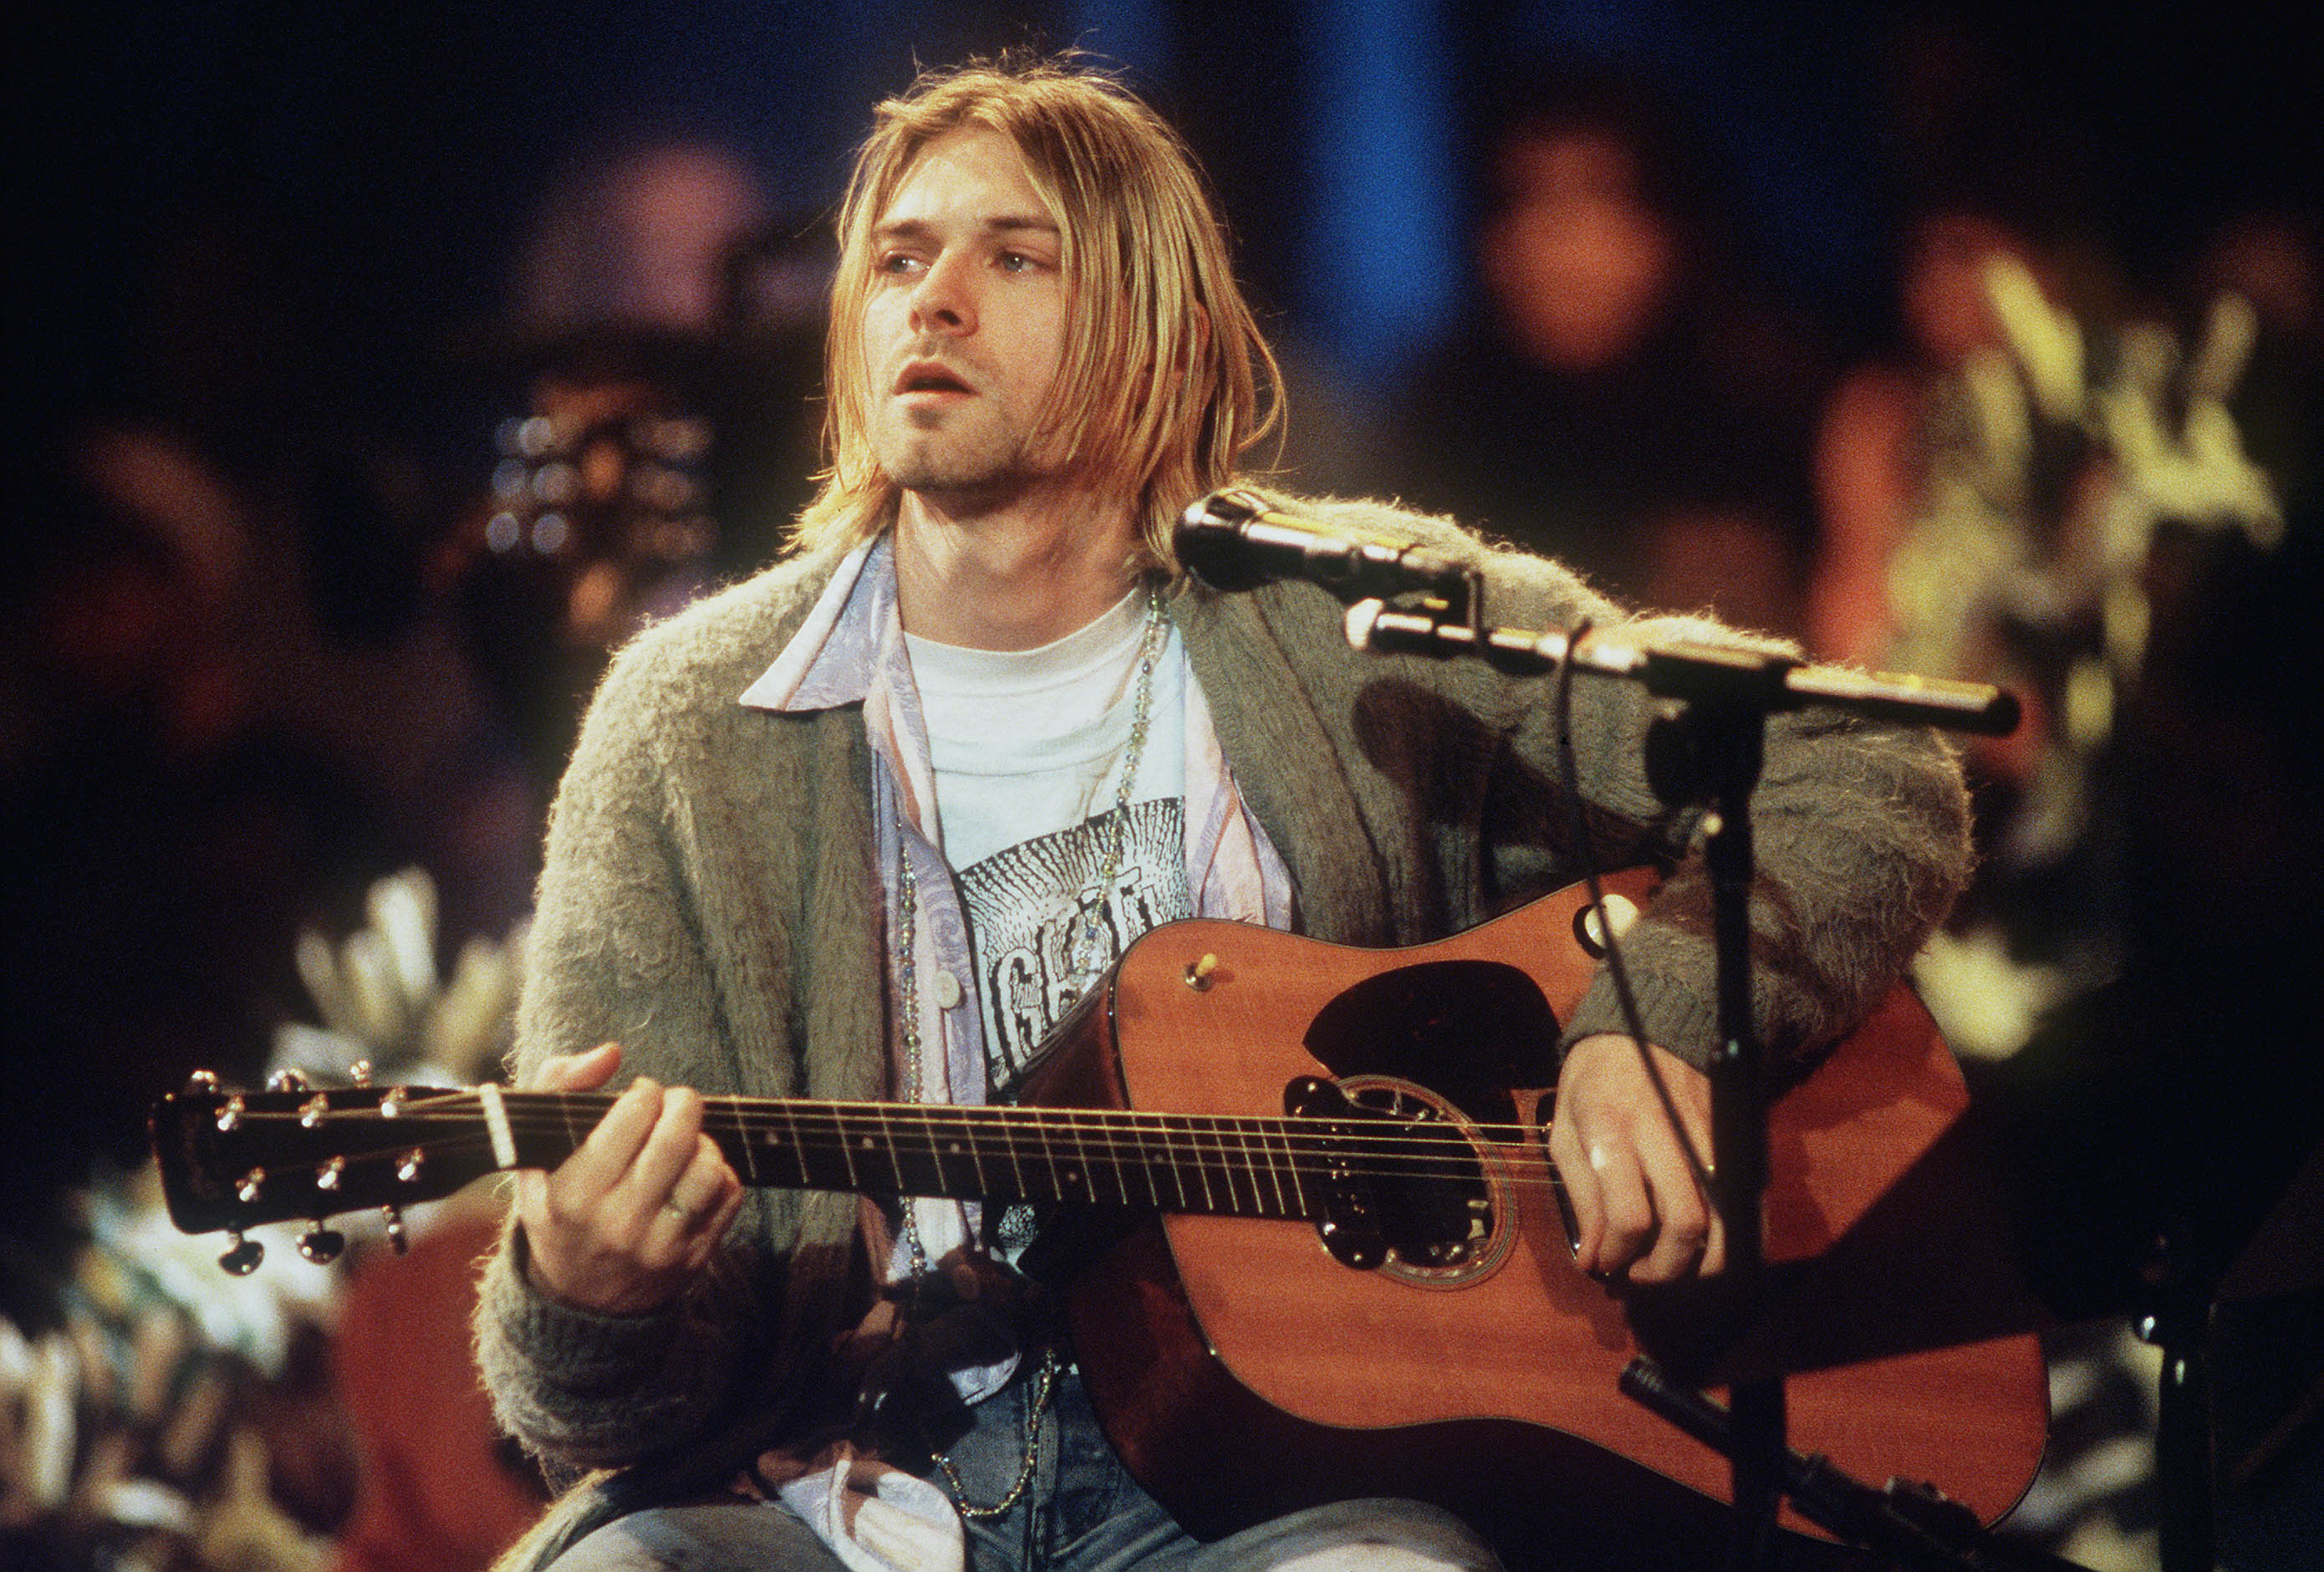 Kurt Cobain performing during Nirvana's set on "MTV Unplugged" in New York City on November 18, 1993 | Source: Getty Images